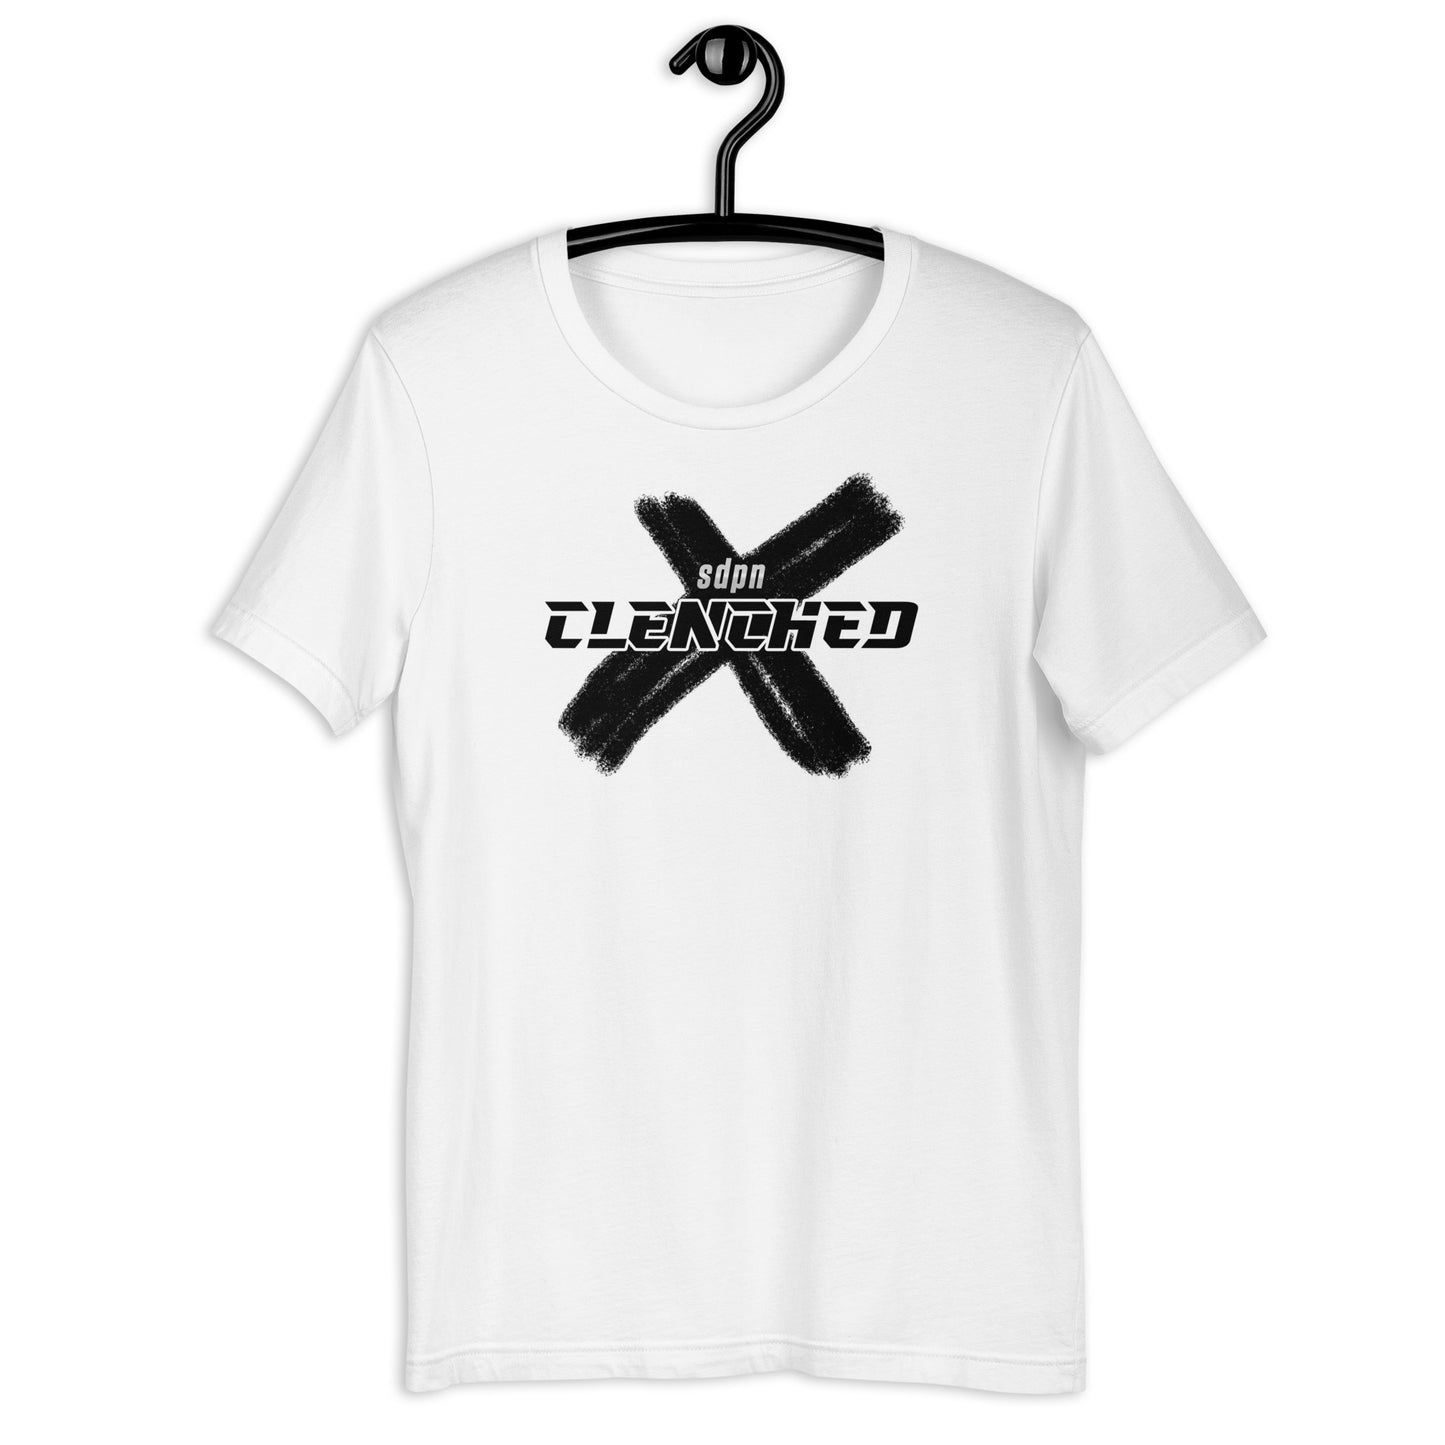 X - Clenched T-shirt